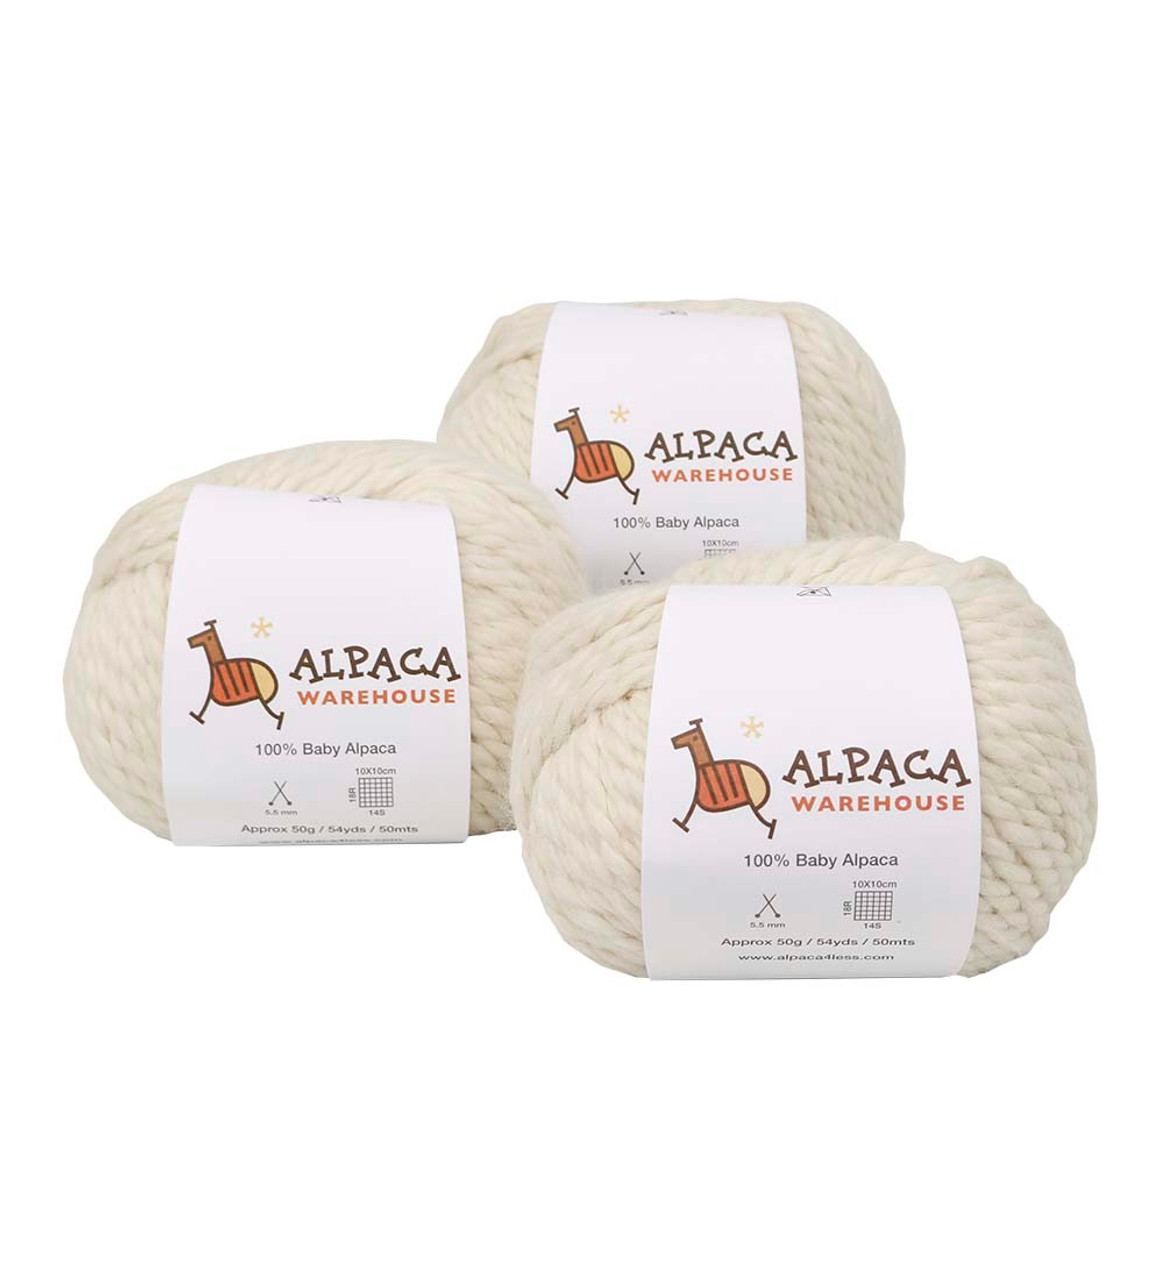 100% Baby Alpaca Yarn Wool Set of 3 Skeins Bulky Chunky Weight - Heavenly Soft and Perfect for Knitting and Crocheting (Soft Gray)